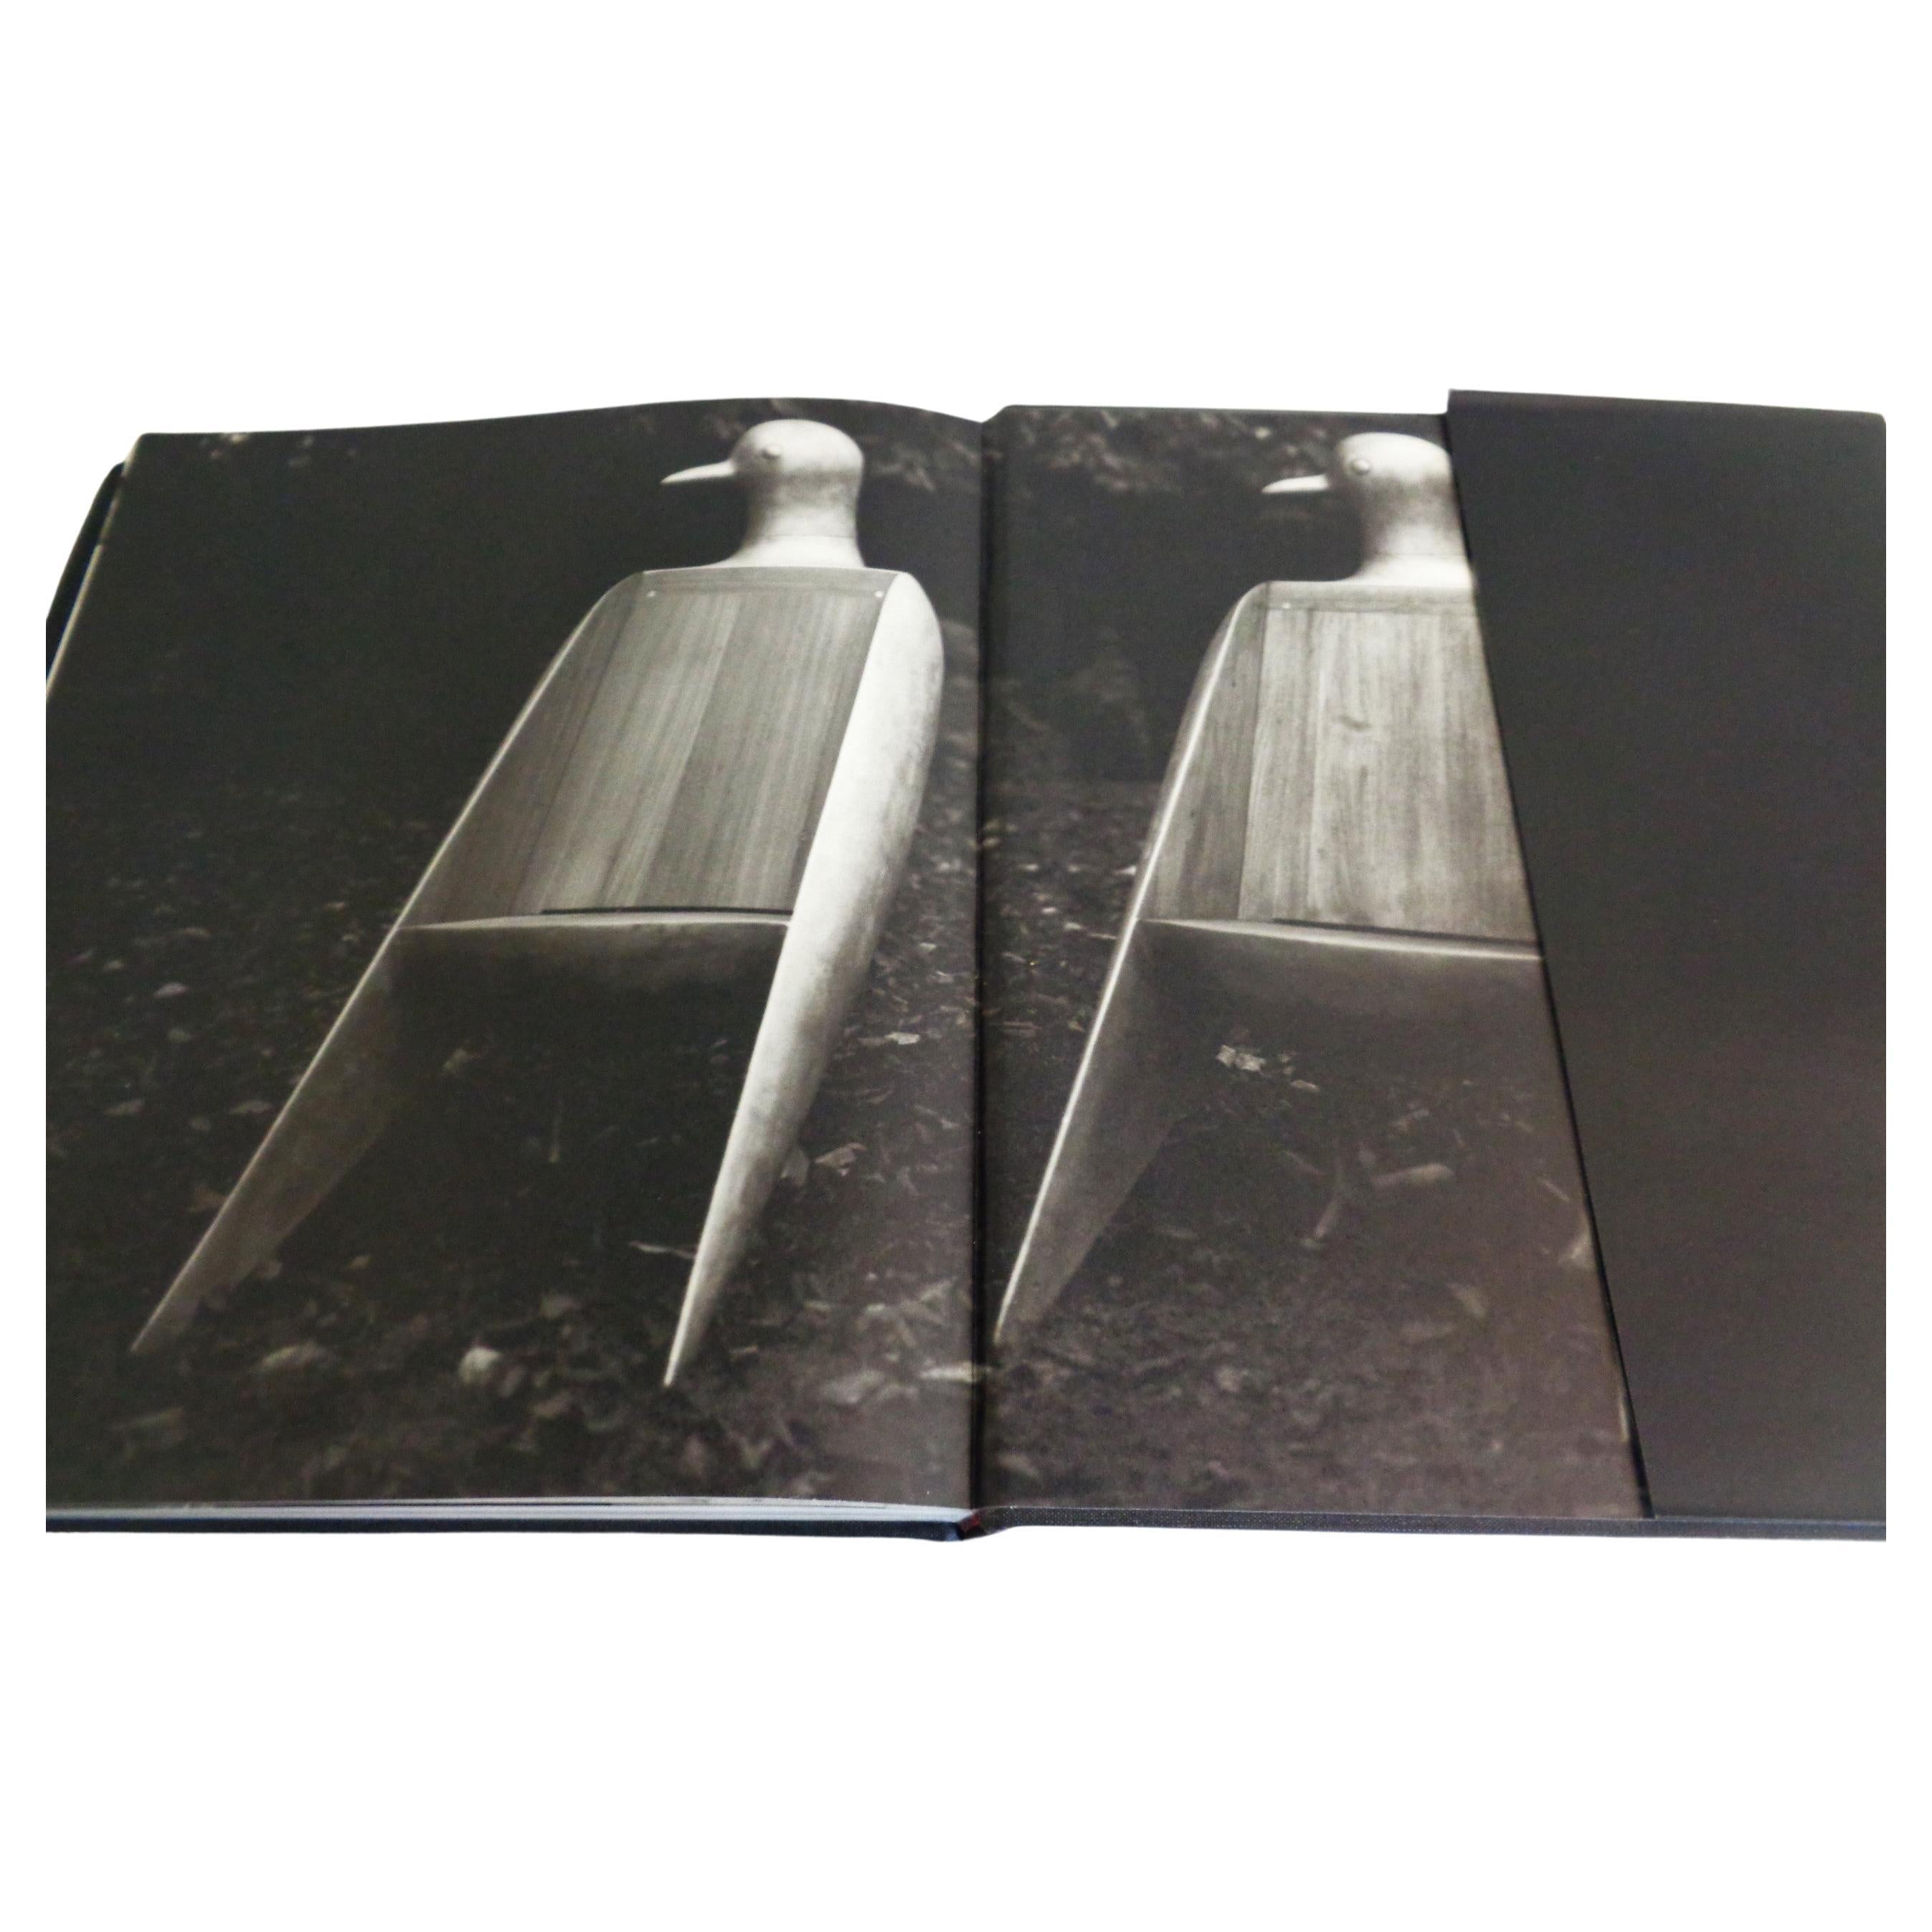 Claude & Francoise - Xavier Lalanne: 2006 Krakoff, Kasmin, Brown - 1st Edition  In Good Condition For Sale In Rochester, NY